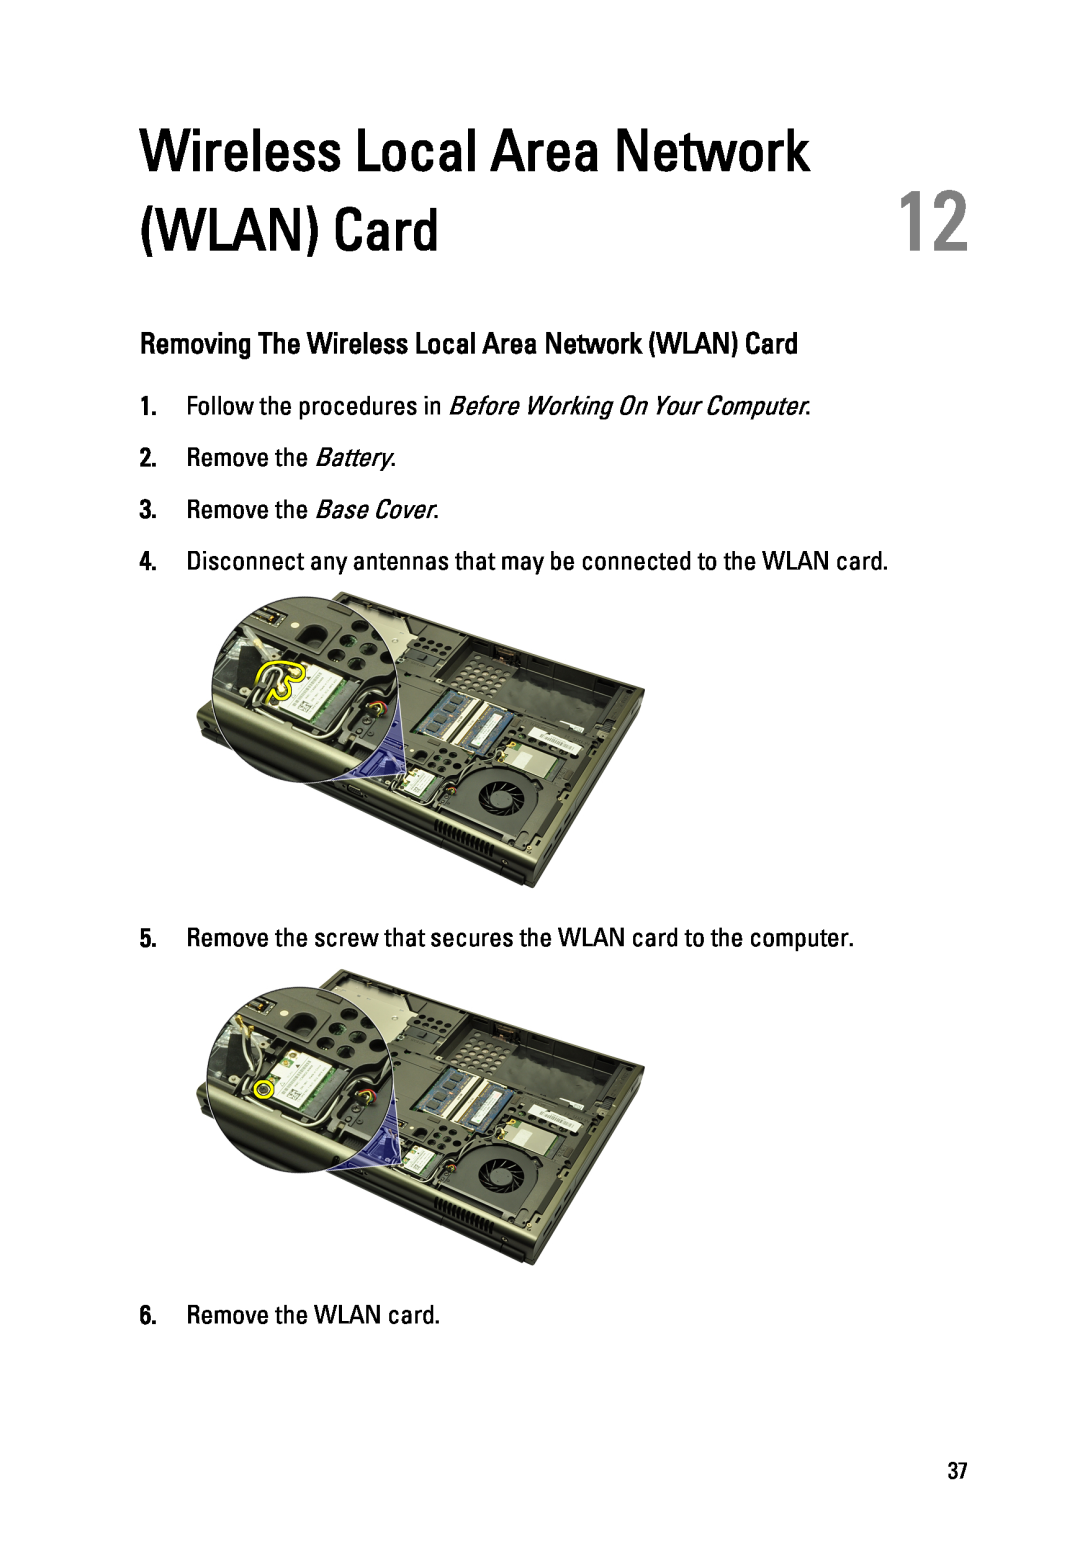 Dell M4600 owner manual Removing The Wireless Local Area Network WLAN Card, Remove the WLAN card 